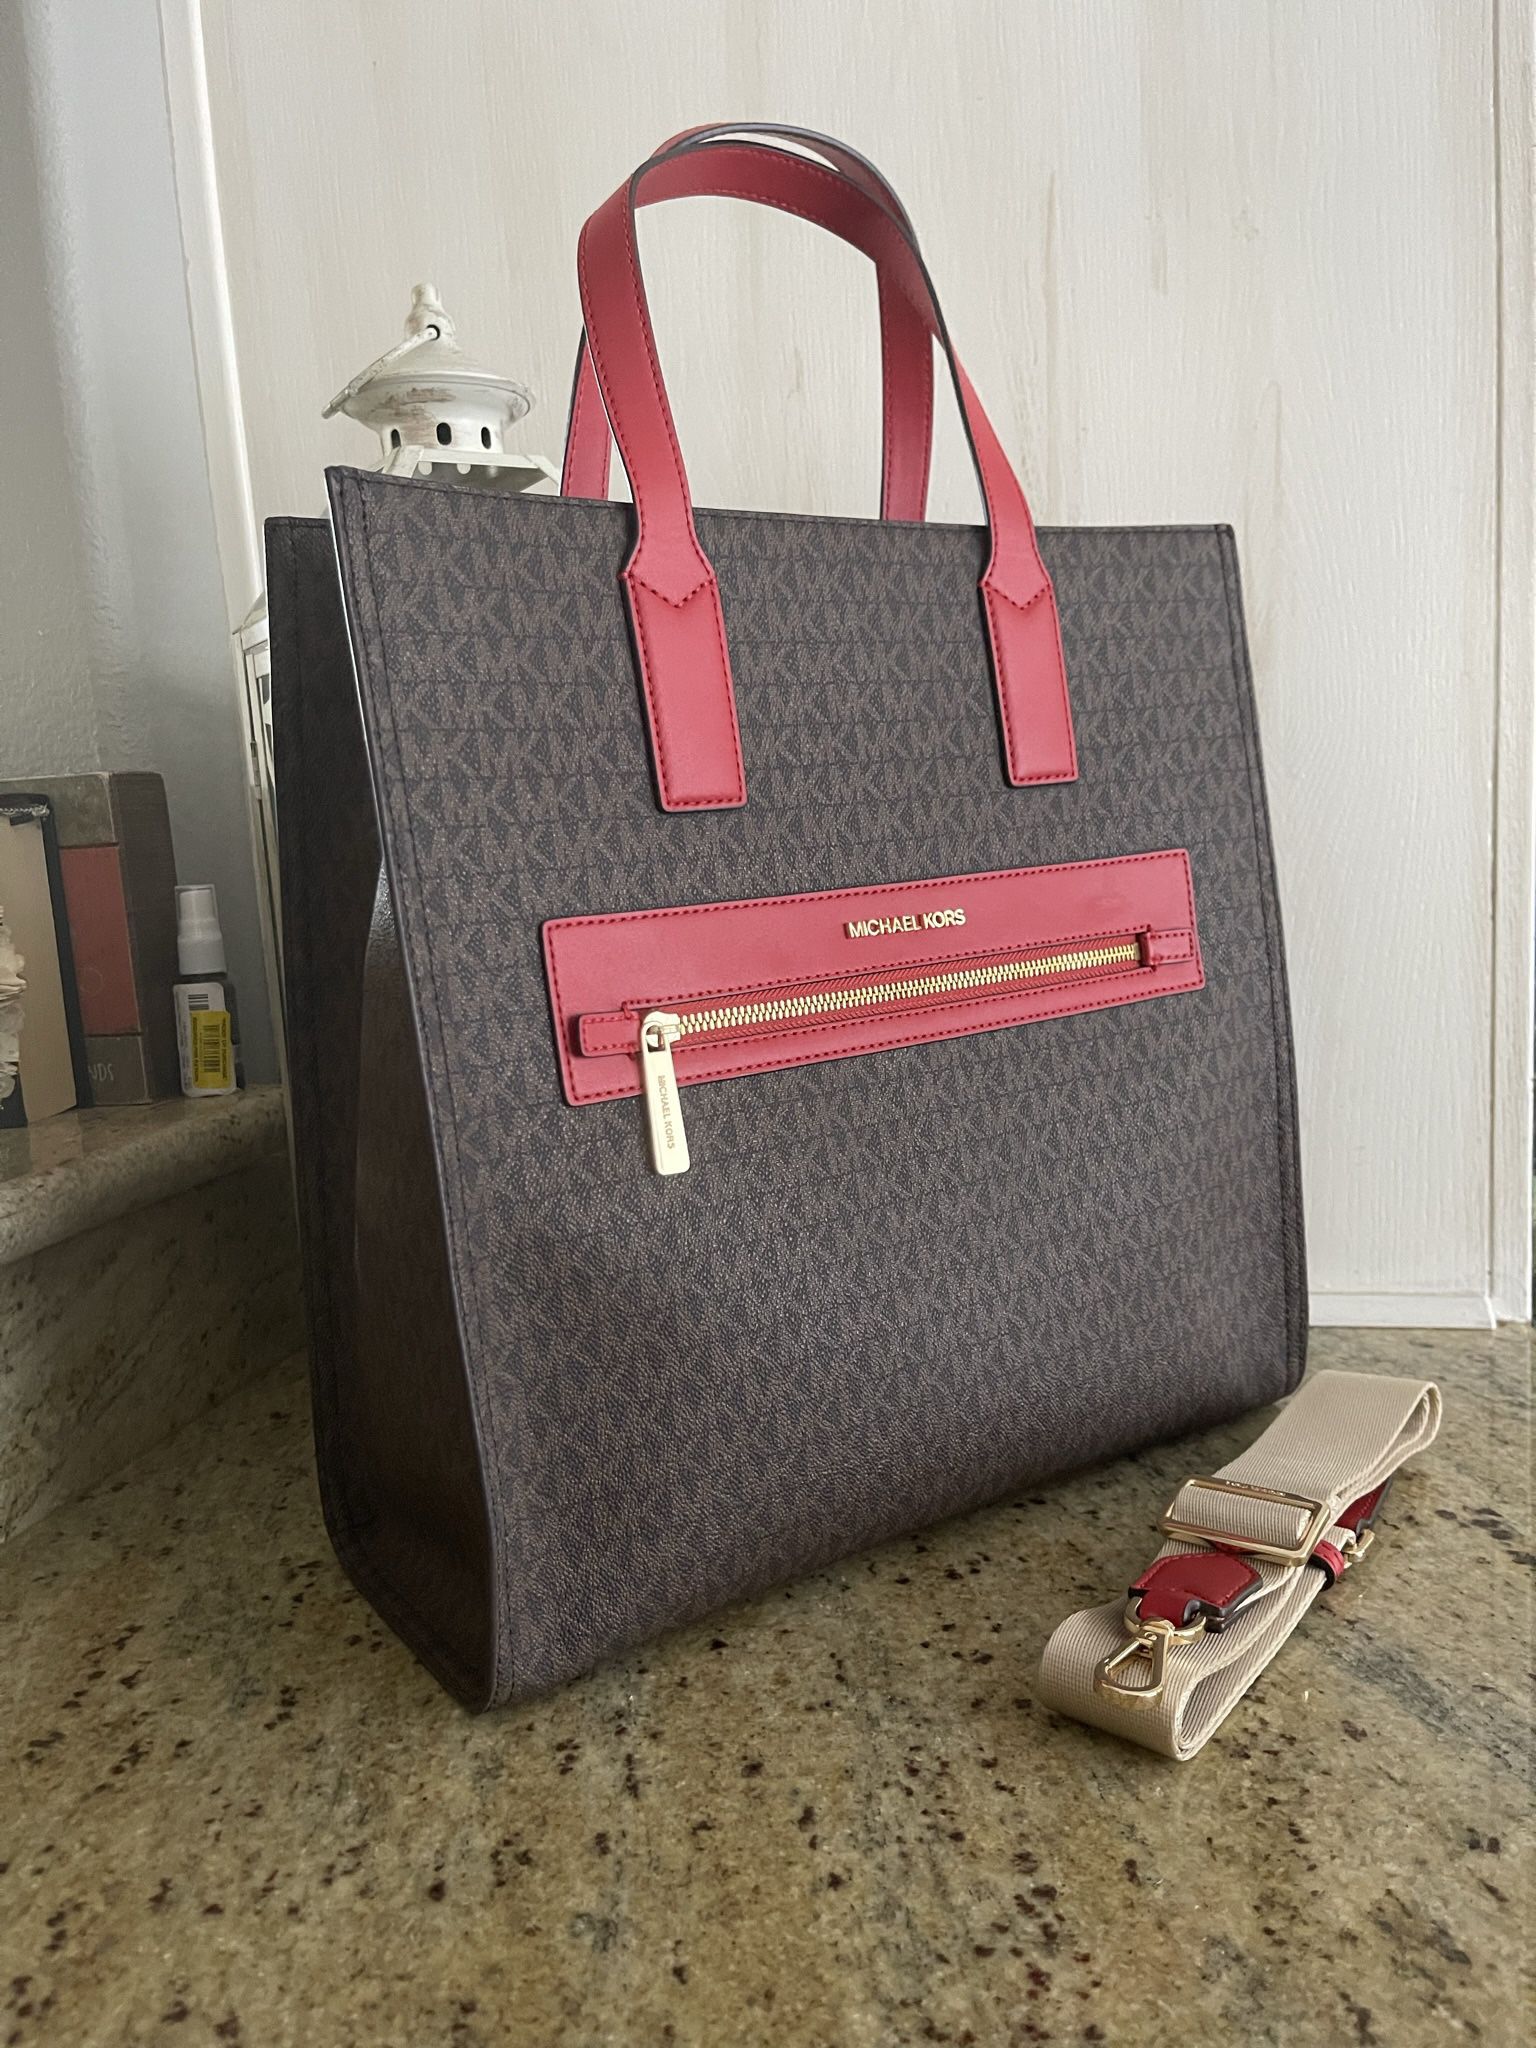 New Mk Large Tote Red / With Extra Strap for Sale in Murrieta, CA